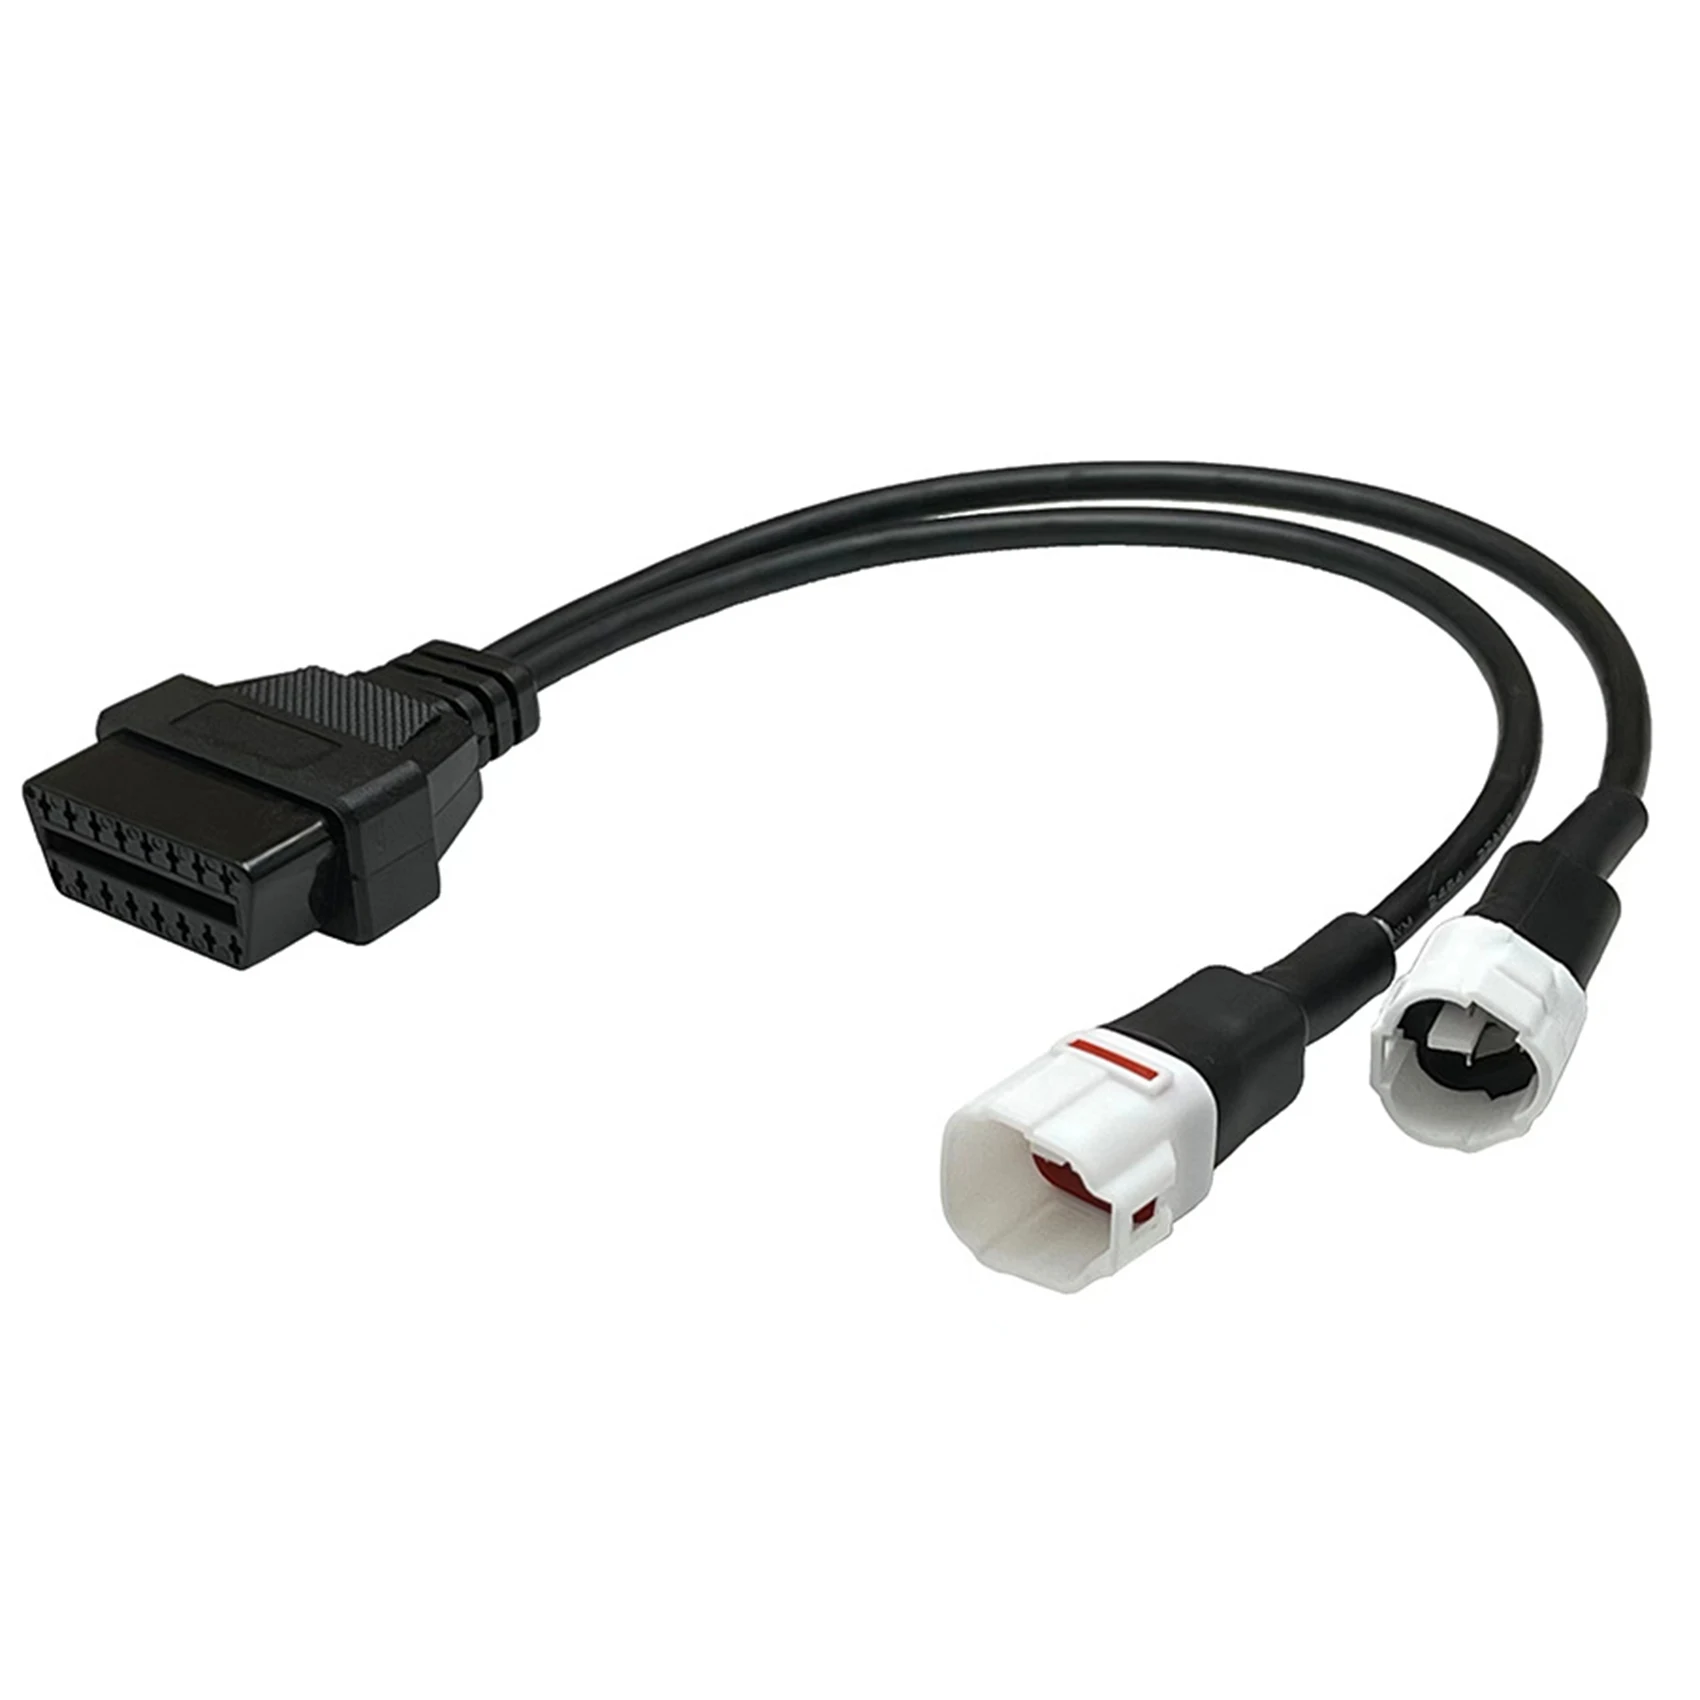 

For Yamaha 3Pin + 4Pin 2 in 1 to OBD2 Motorcycle Scanner Cable Works Along with OBD Scanner